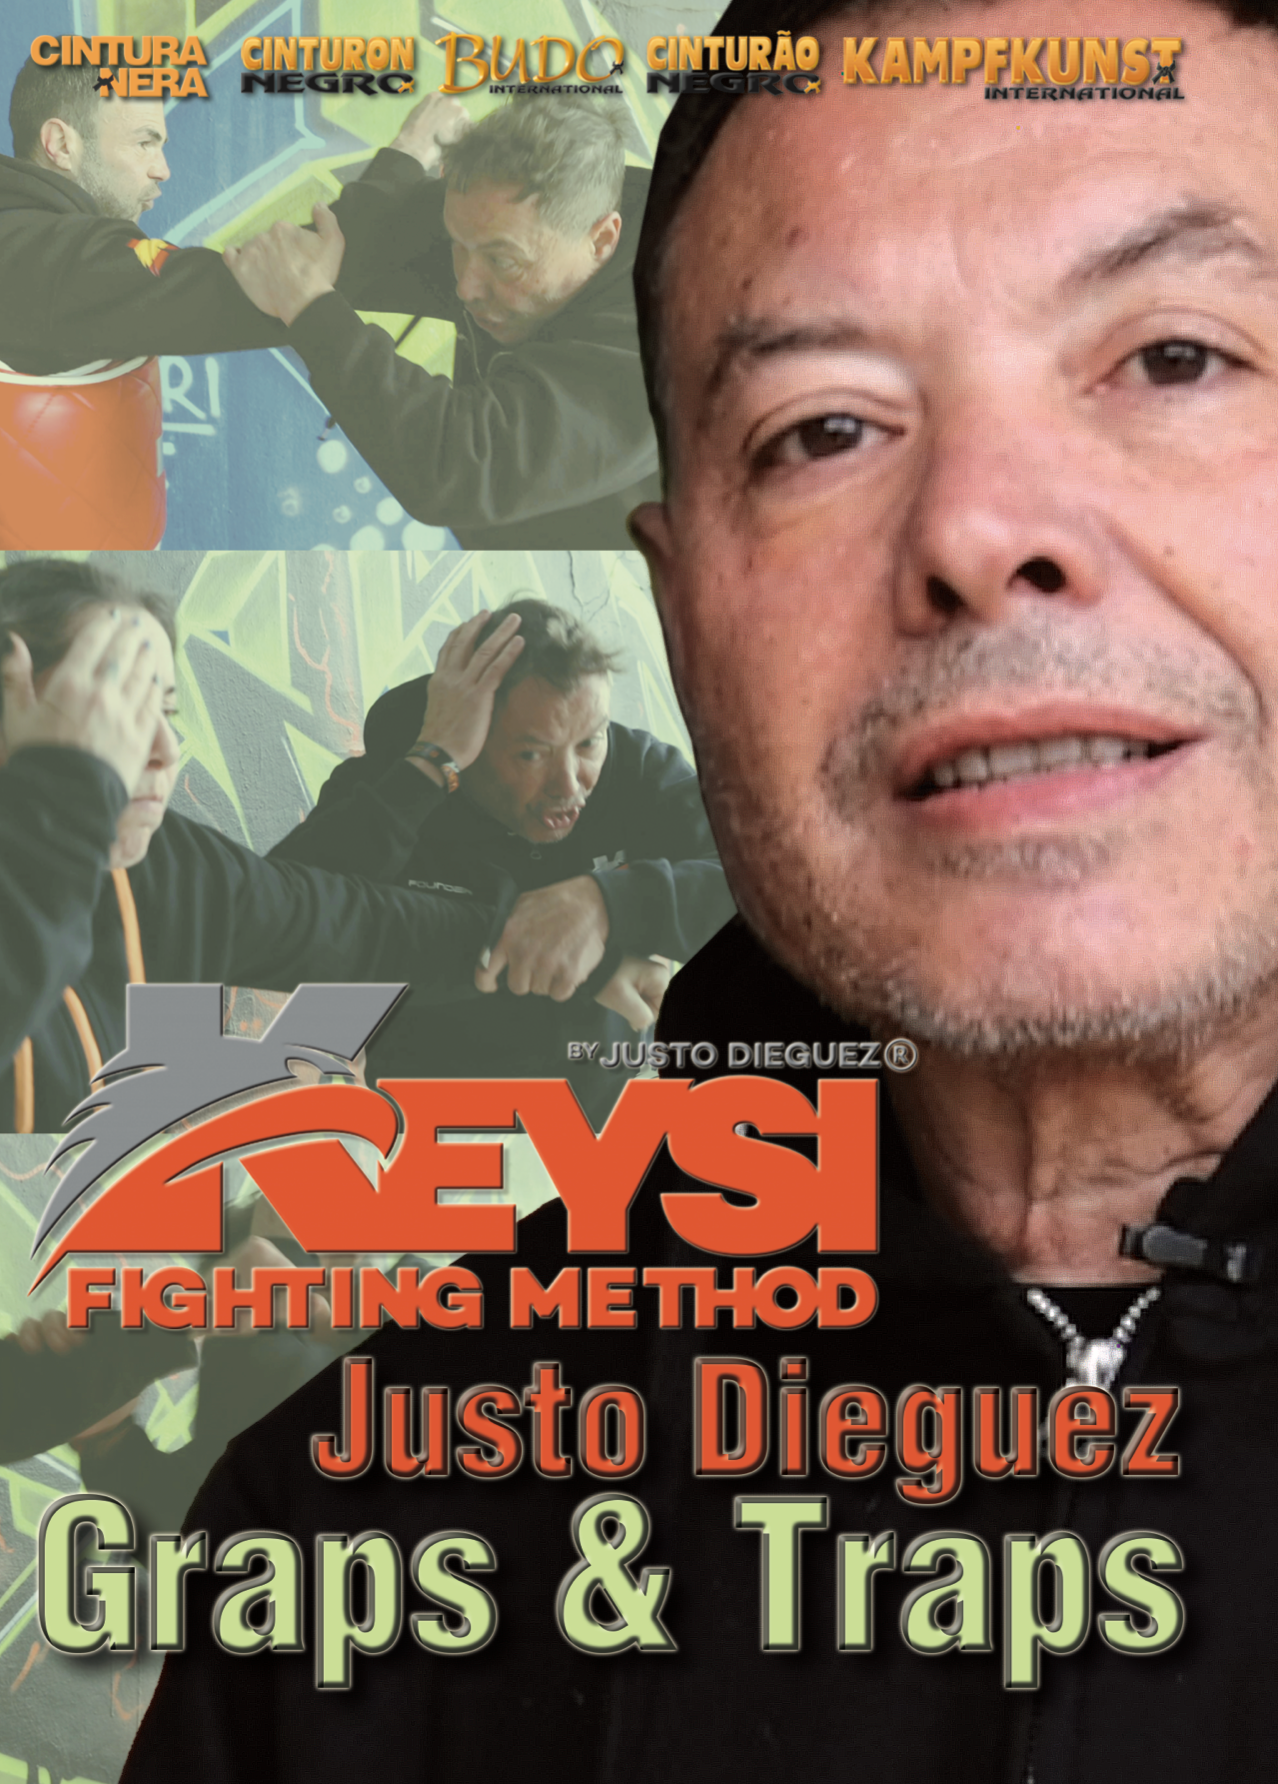 Keysi Grabs & Traps DVD with Justo Dieguez